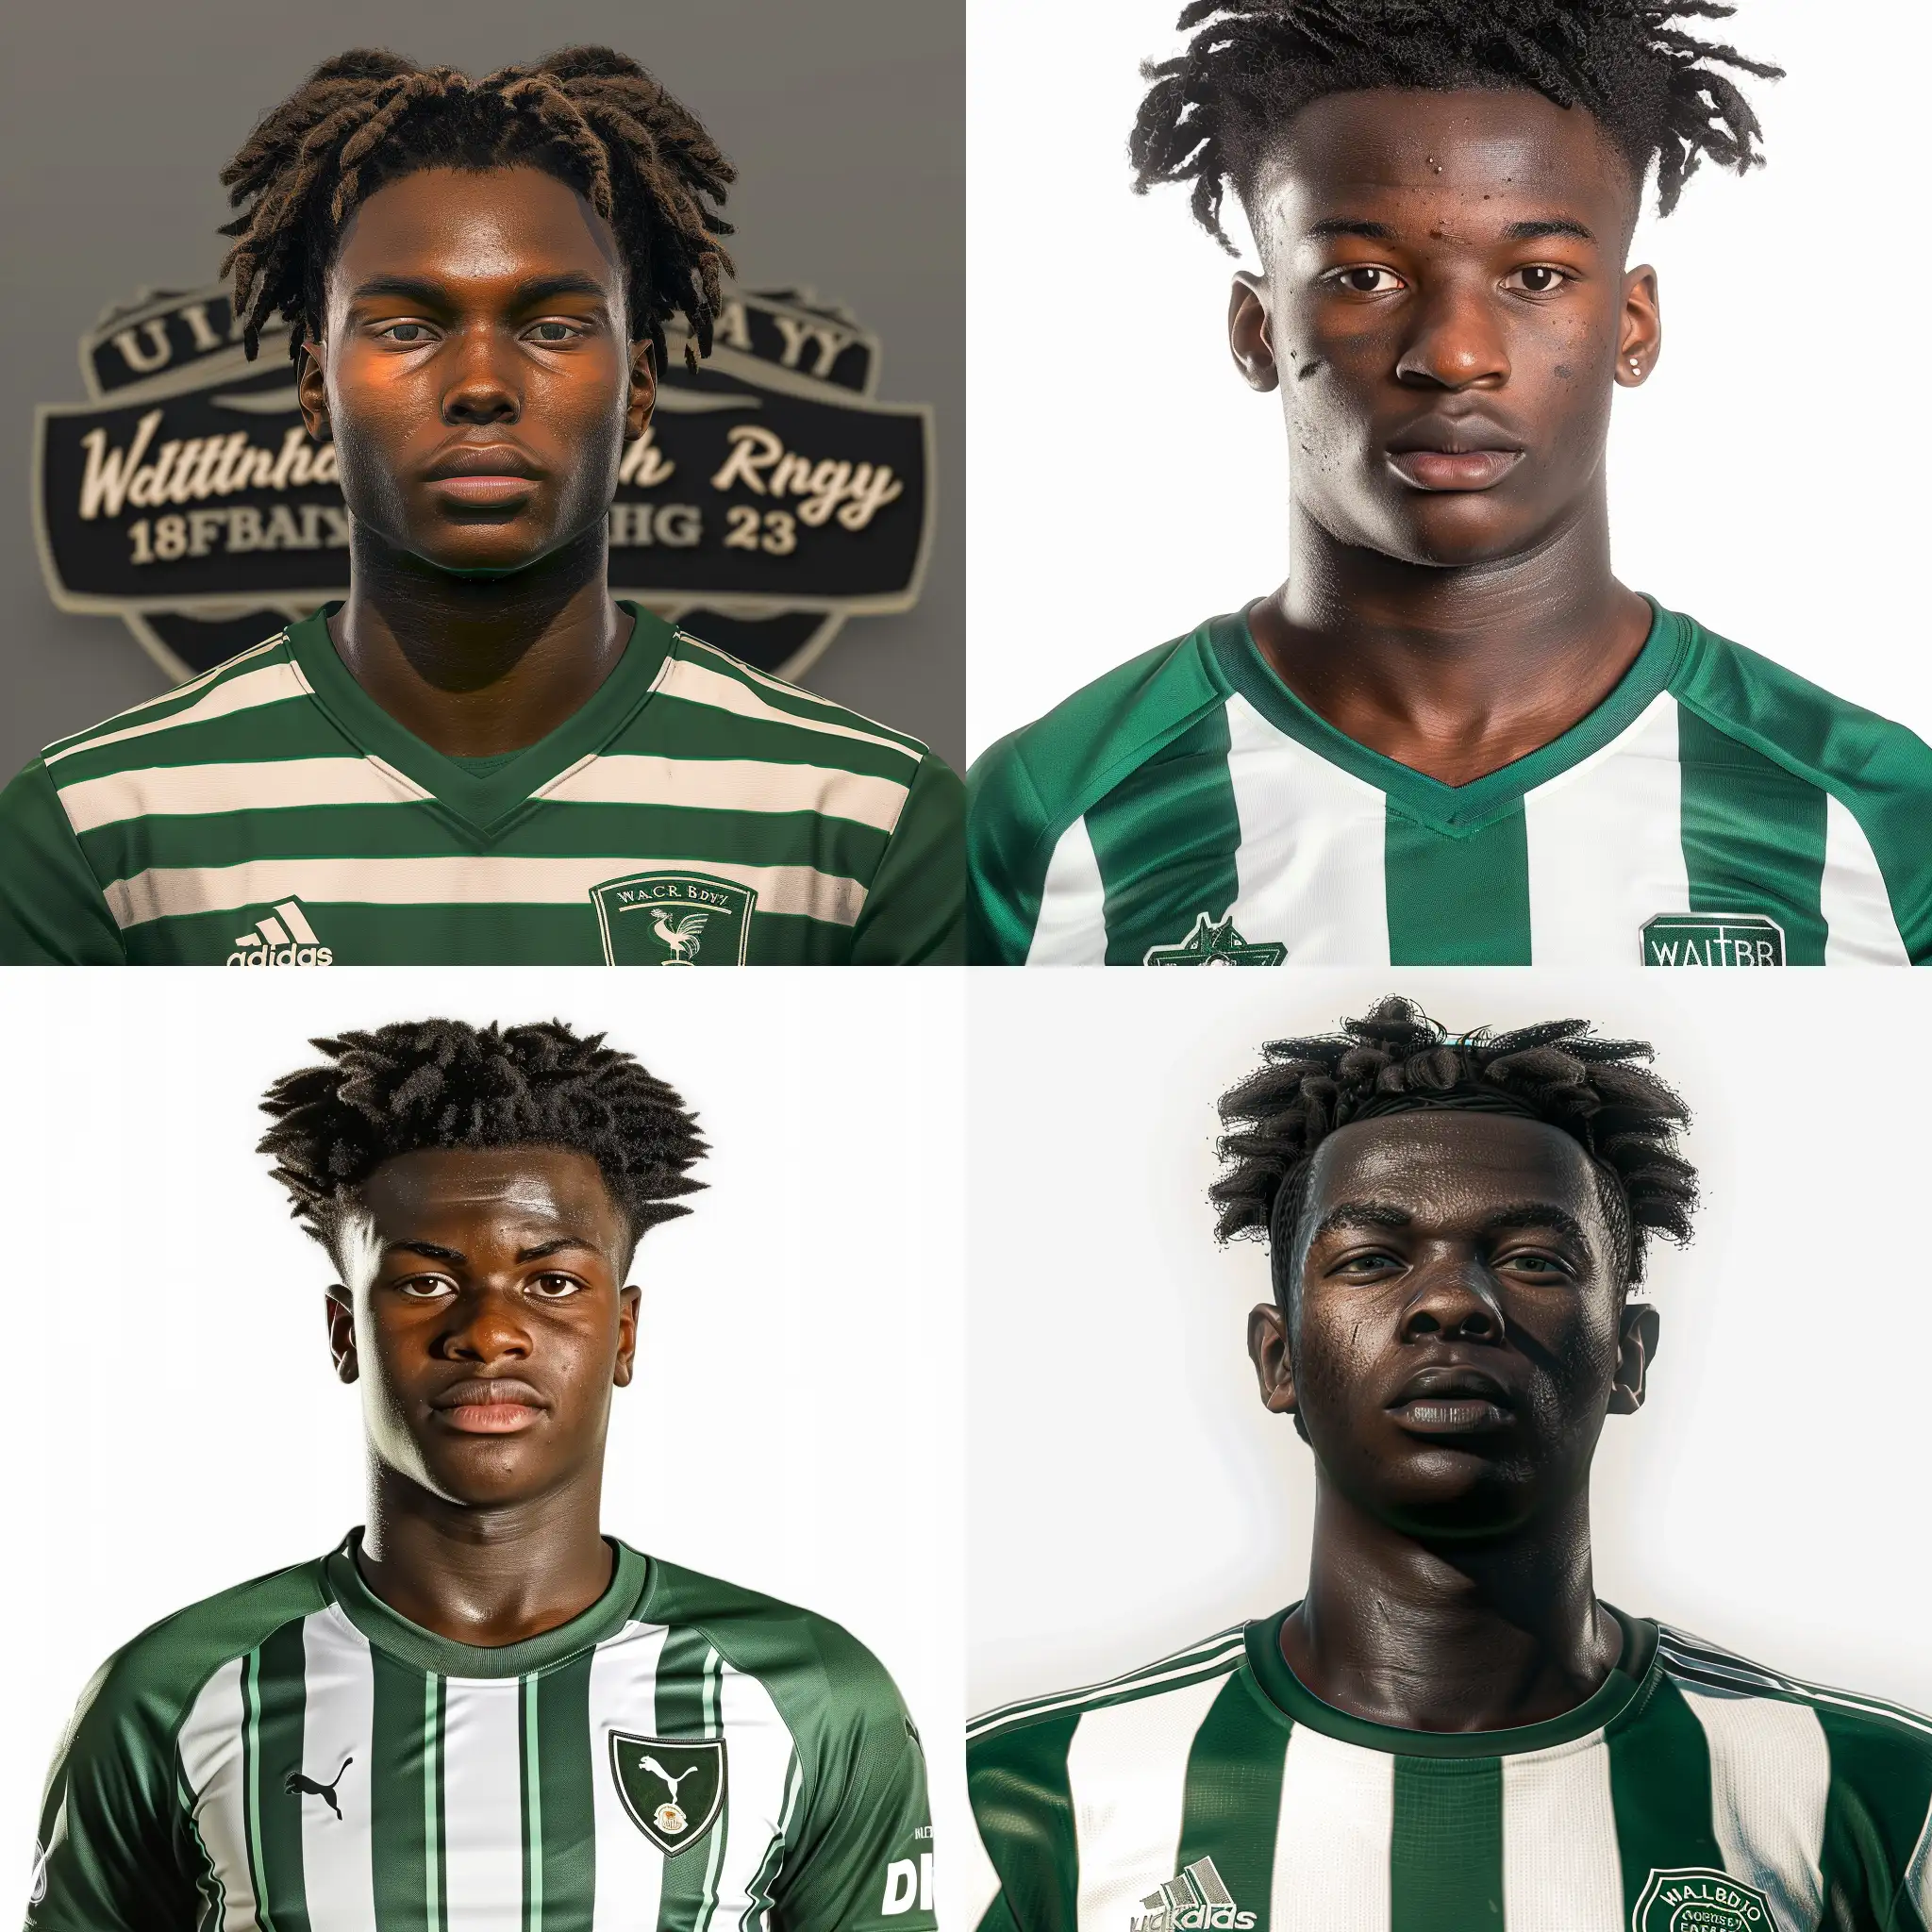 Ultra Realistic team profile photo of 18 year old football player for Waltham Abbey Football Club. Green white striped football jersey. The person is Of carribbean origin but born in London. Street smart looking. picture from a facepack from Football Manager 23.